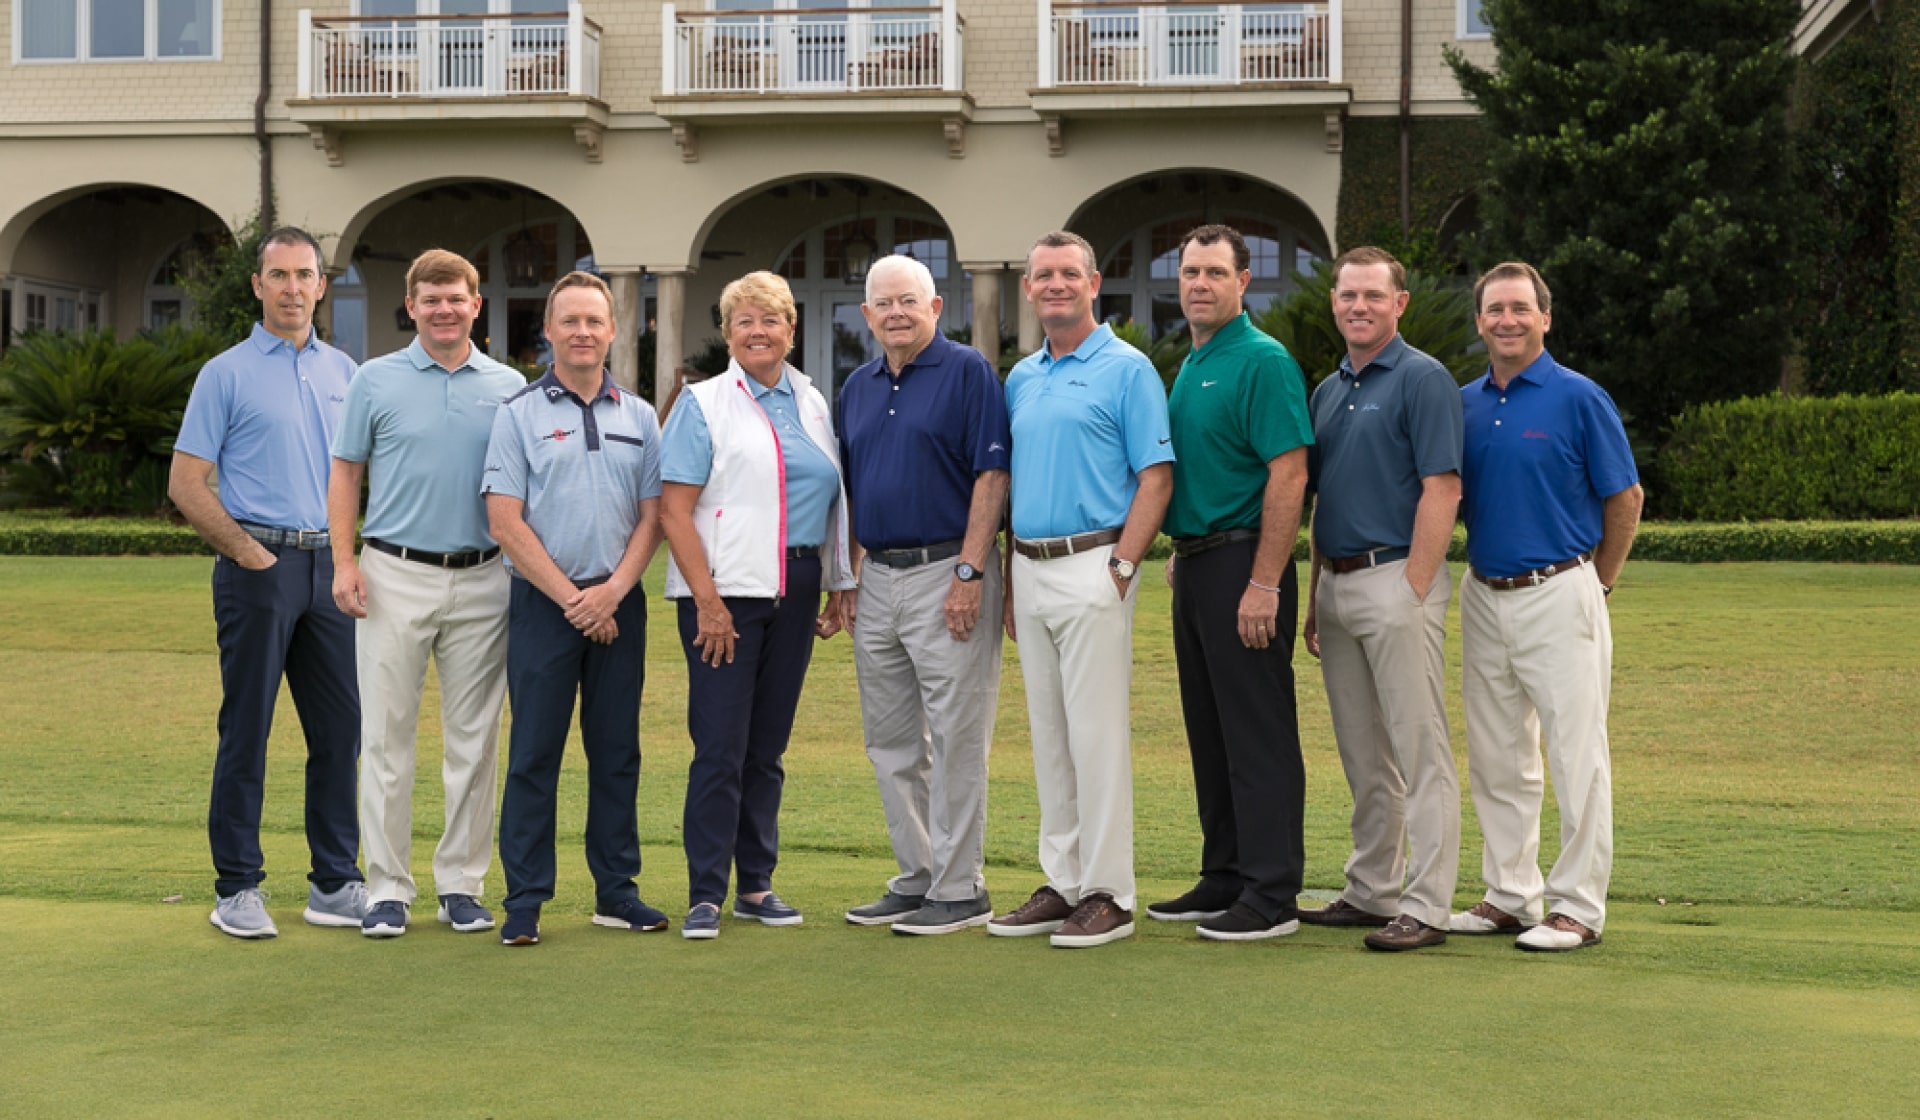 group photo of the golf instructors at sea island